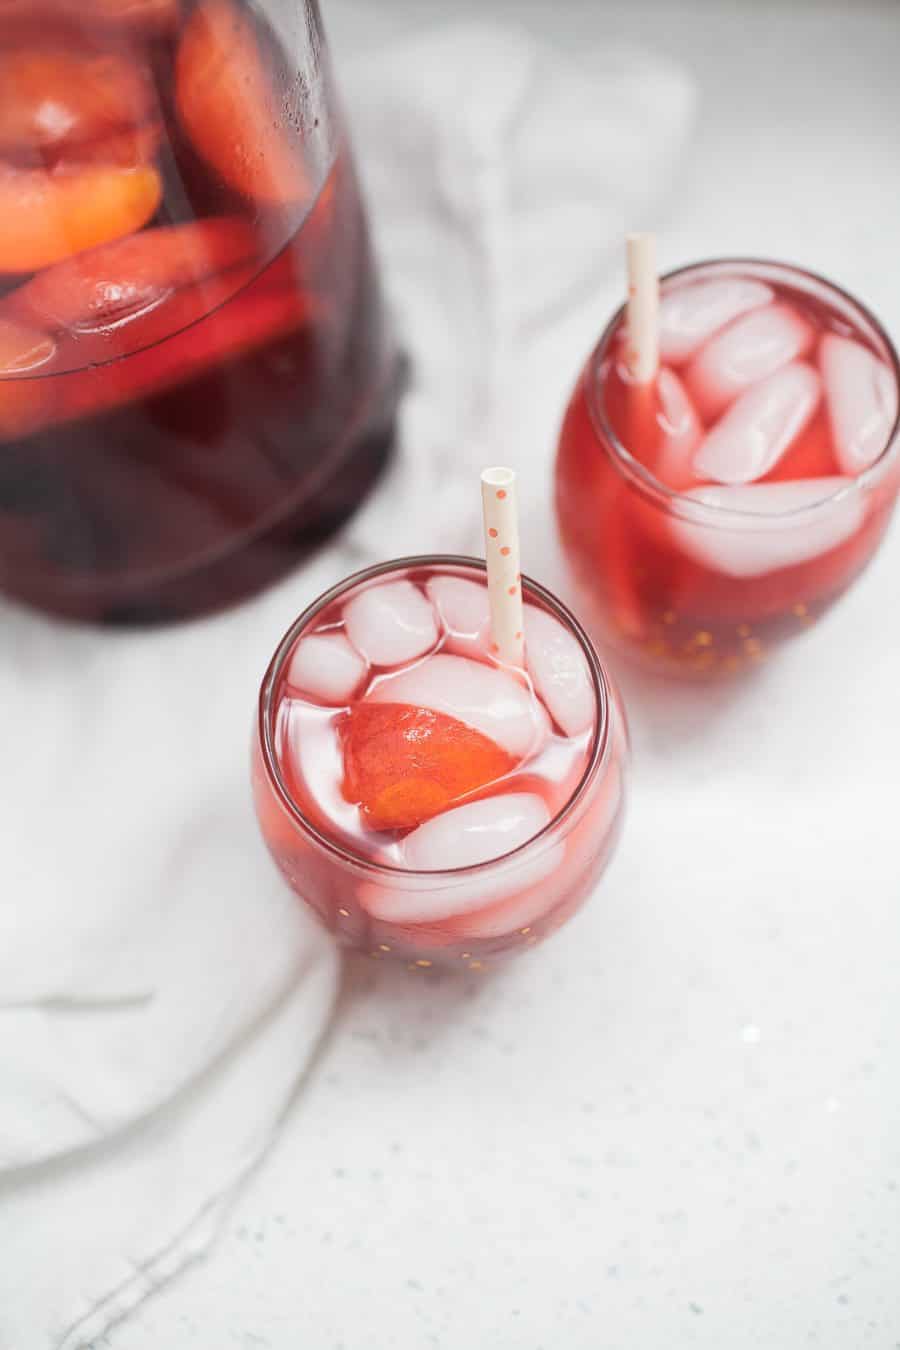 This peach blackberry lemonade is the perfect lemonade mocktail for any occasion! Baby showers, bridal showers, or just because, this peach blackberry lemonade is perfectly sweet and tart. This lemonade is a fruity version of a classic that everyone will love!?